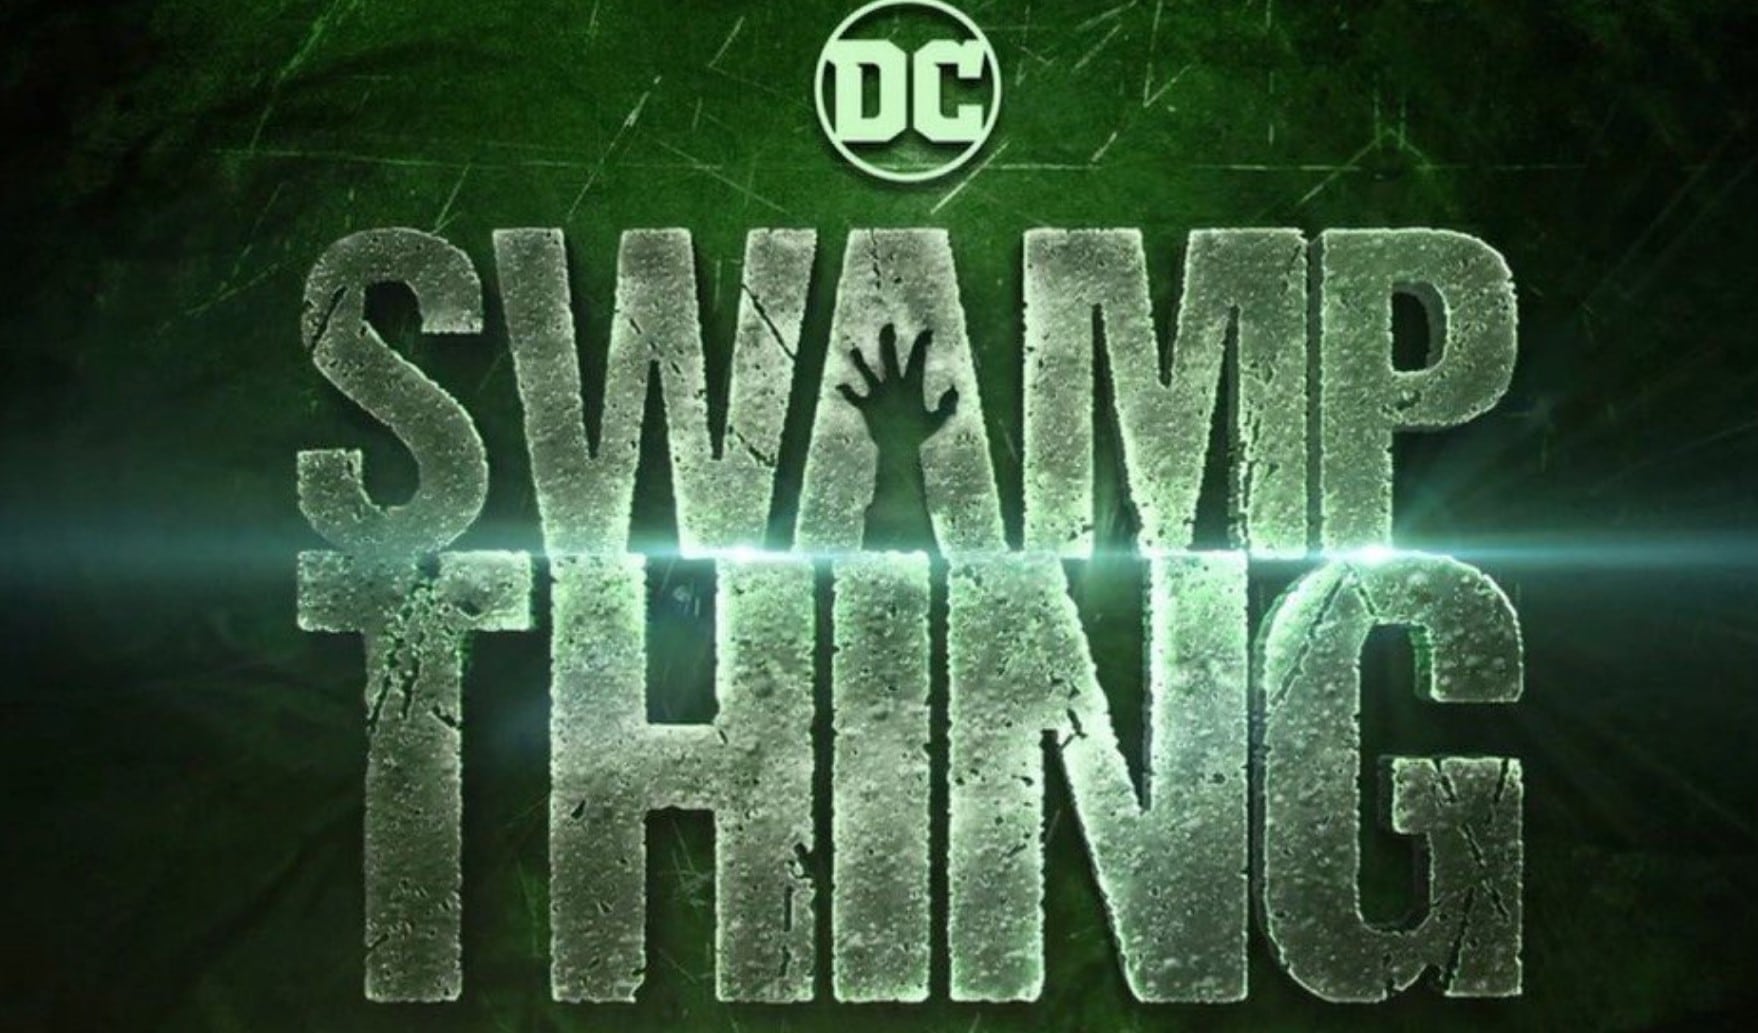 Photos From The Sets Of ‘Swamp Thing’ Reveal The First Look At The DC Series